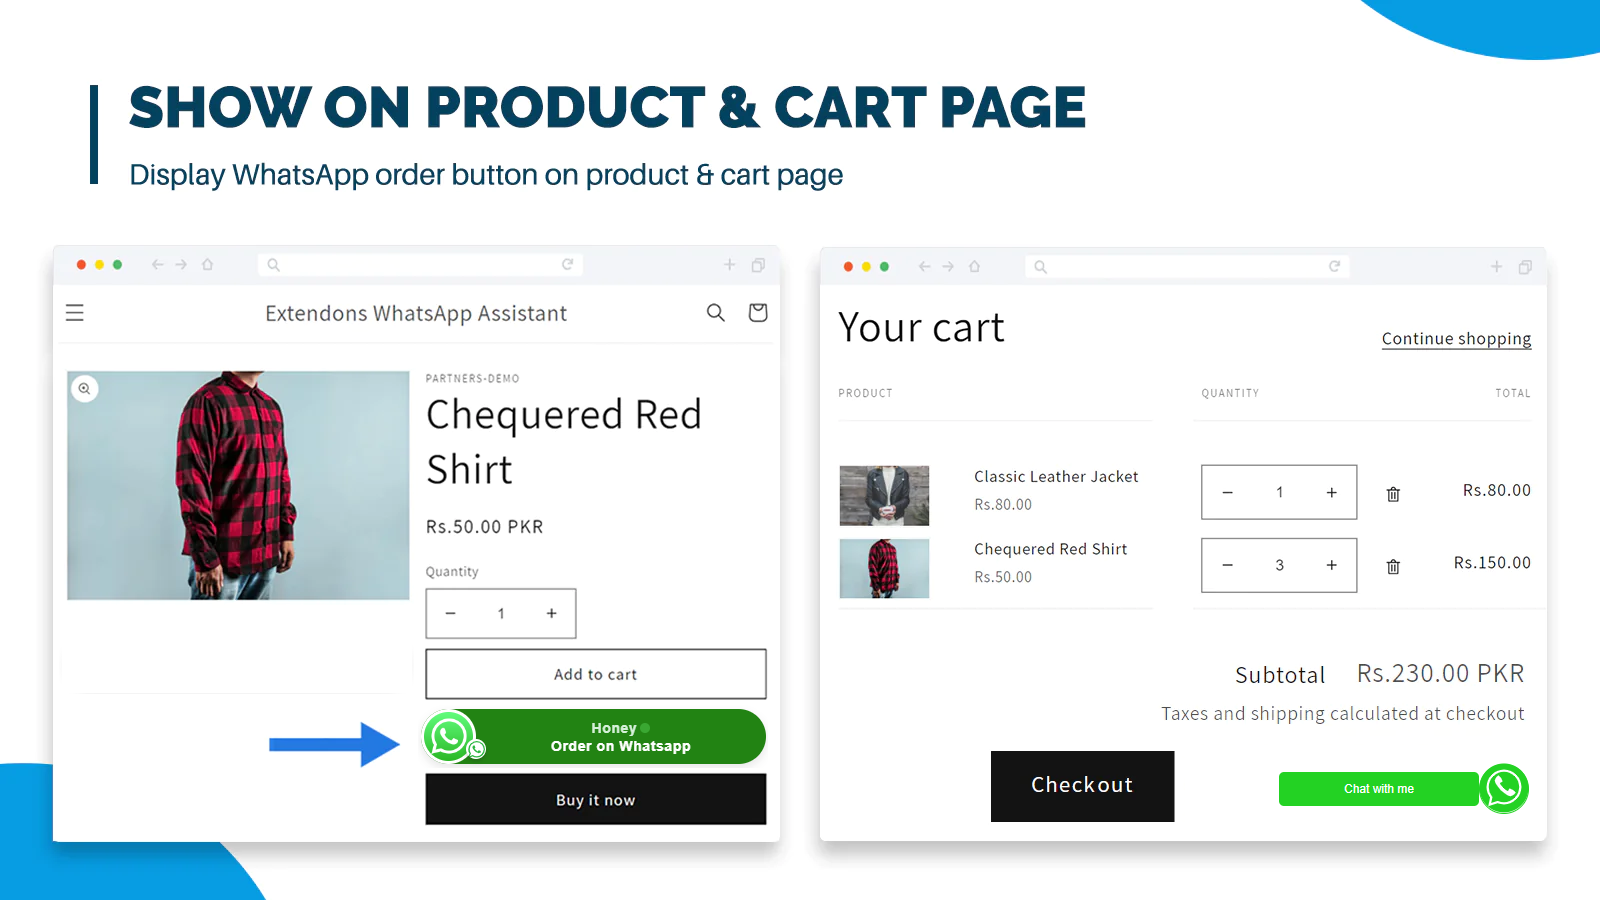 Enable Order on WhatsApp button on Cart Page